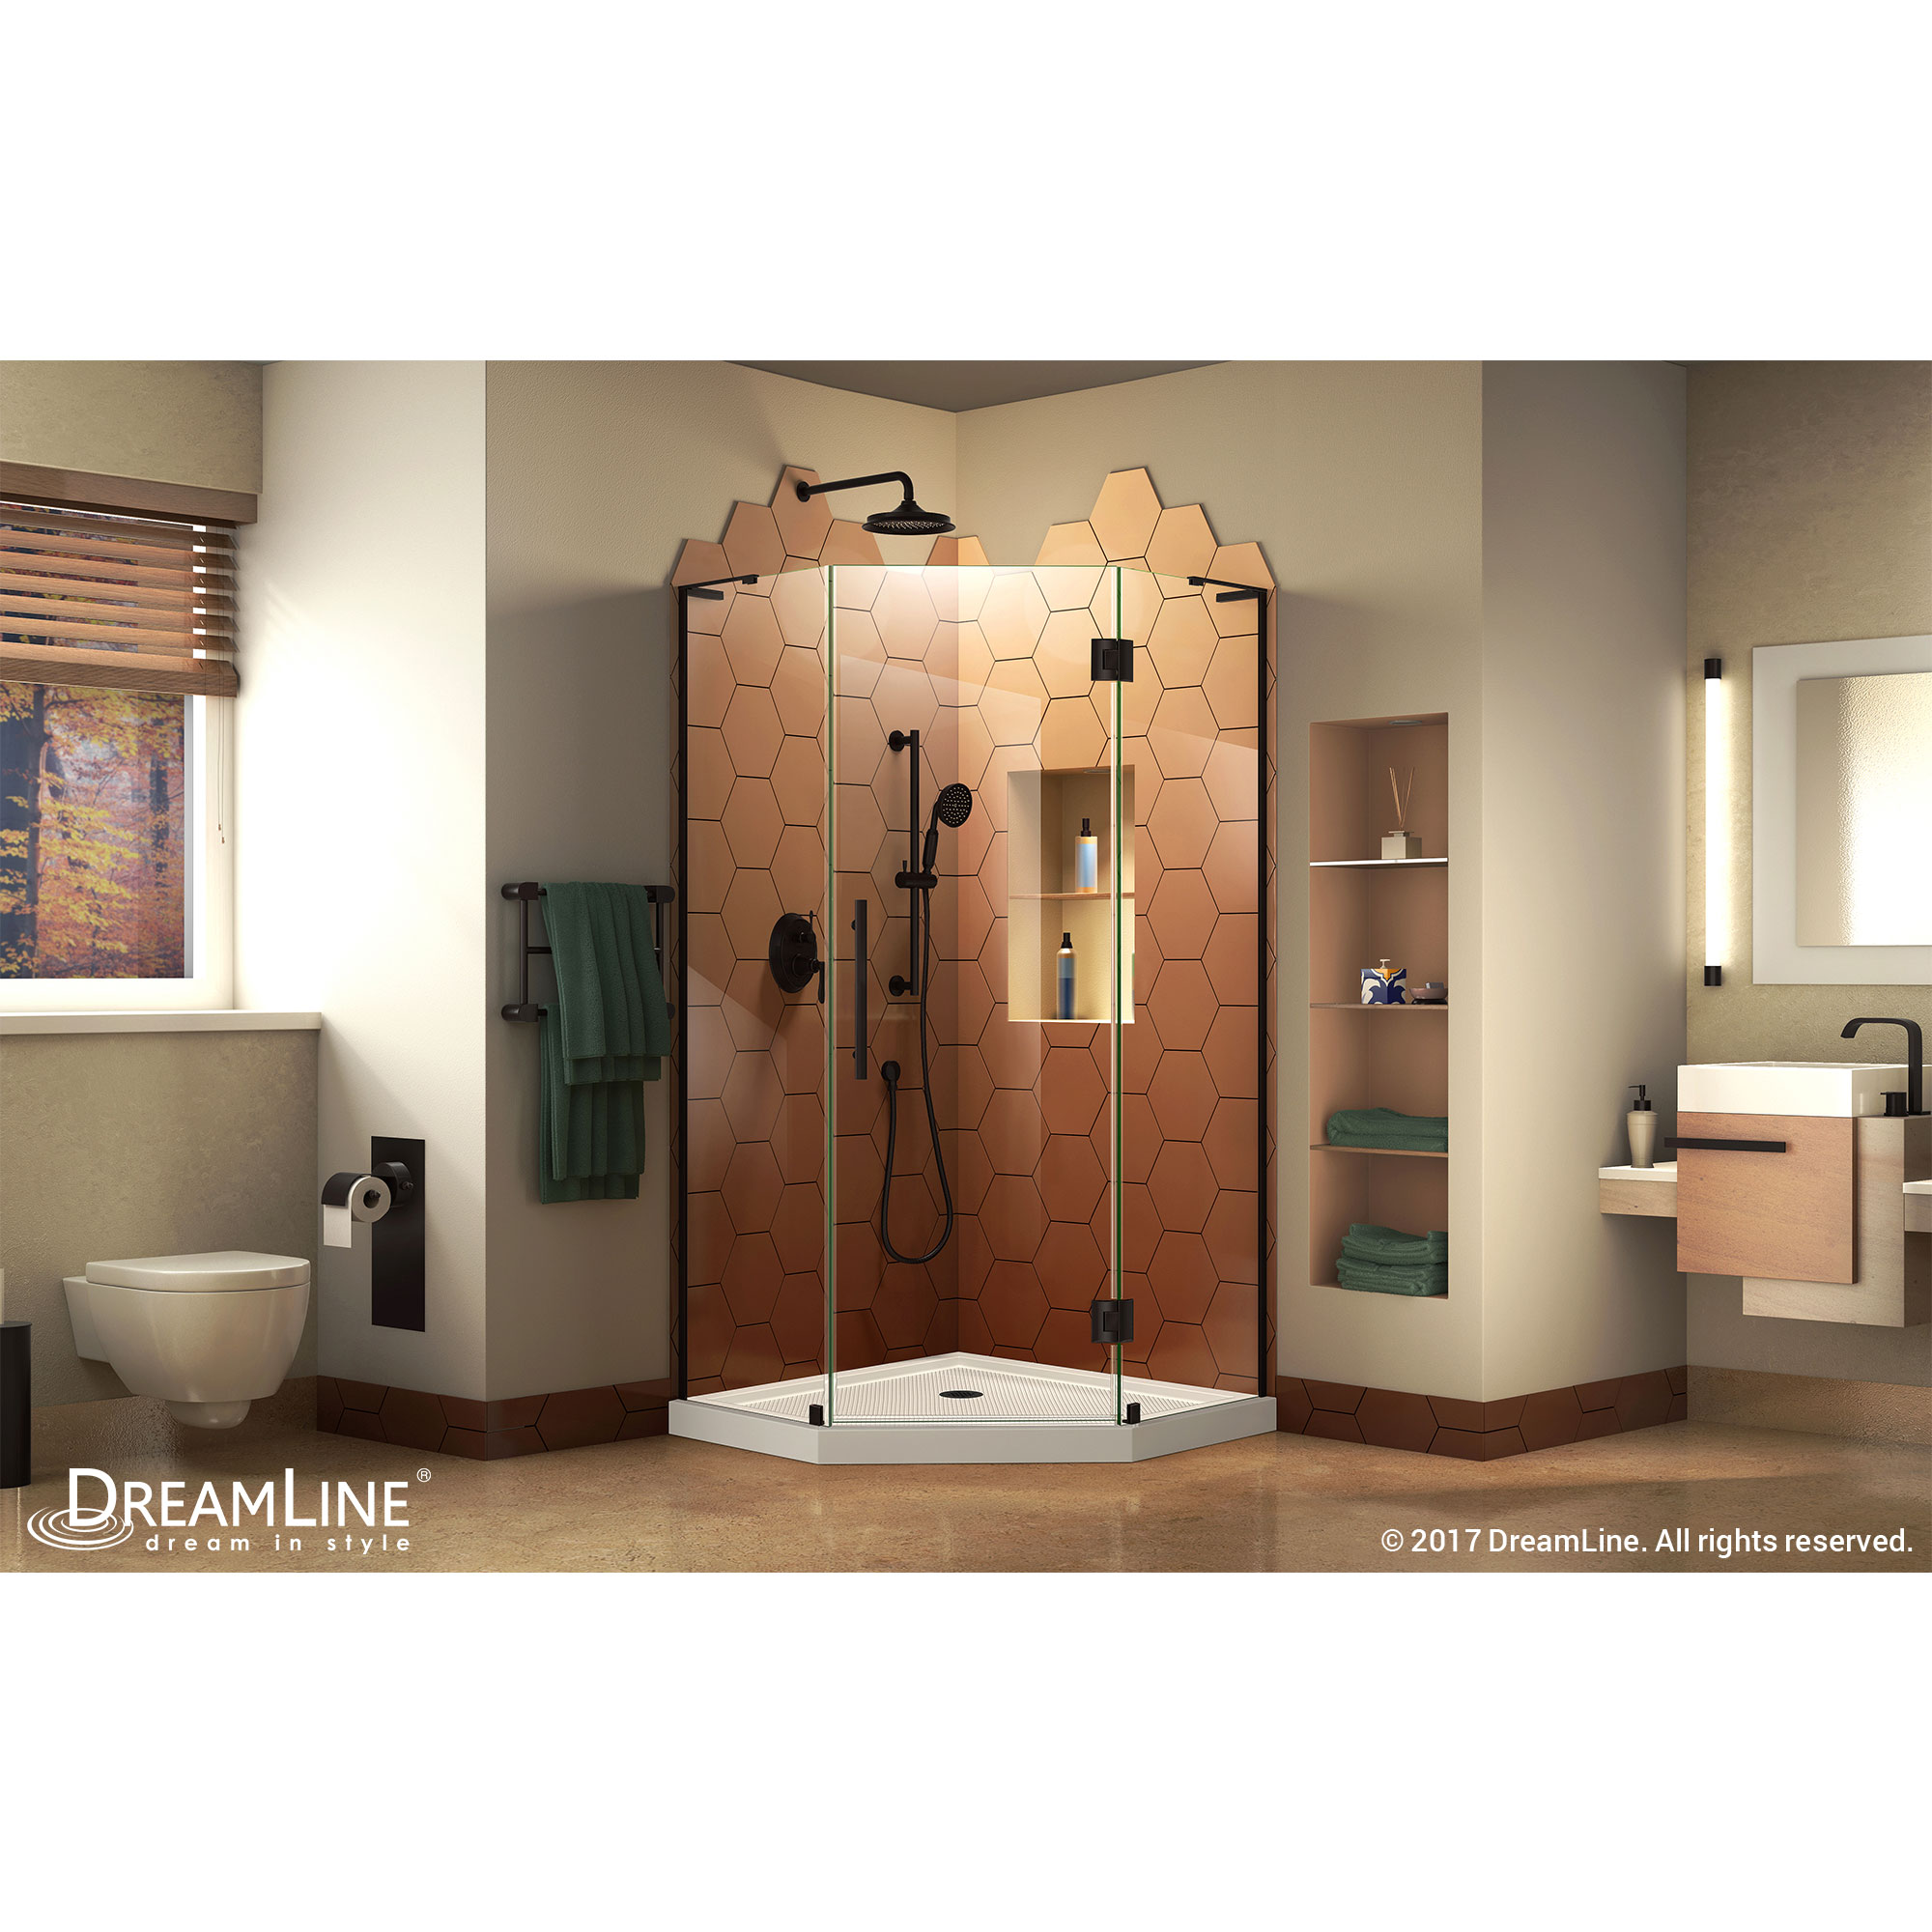 DreamLine Prism Plus 40 in. D x 40 in. W x 74 3/4 in. H Hinged Shower Enclosure in Satin Black with Corner Drain White Base